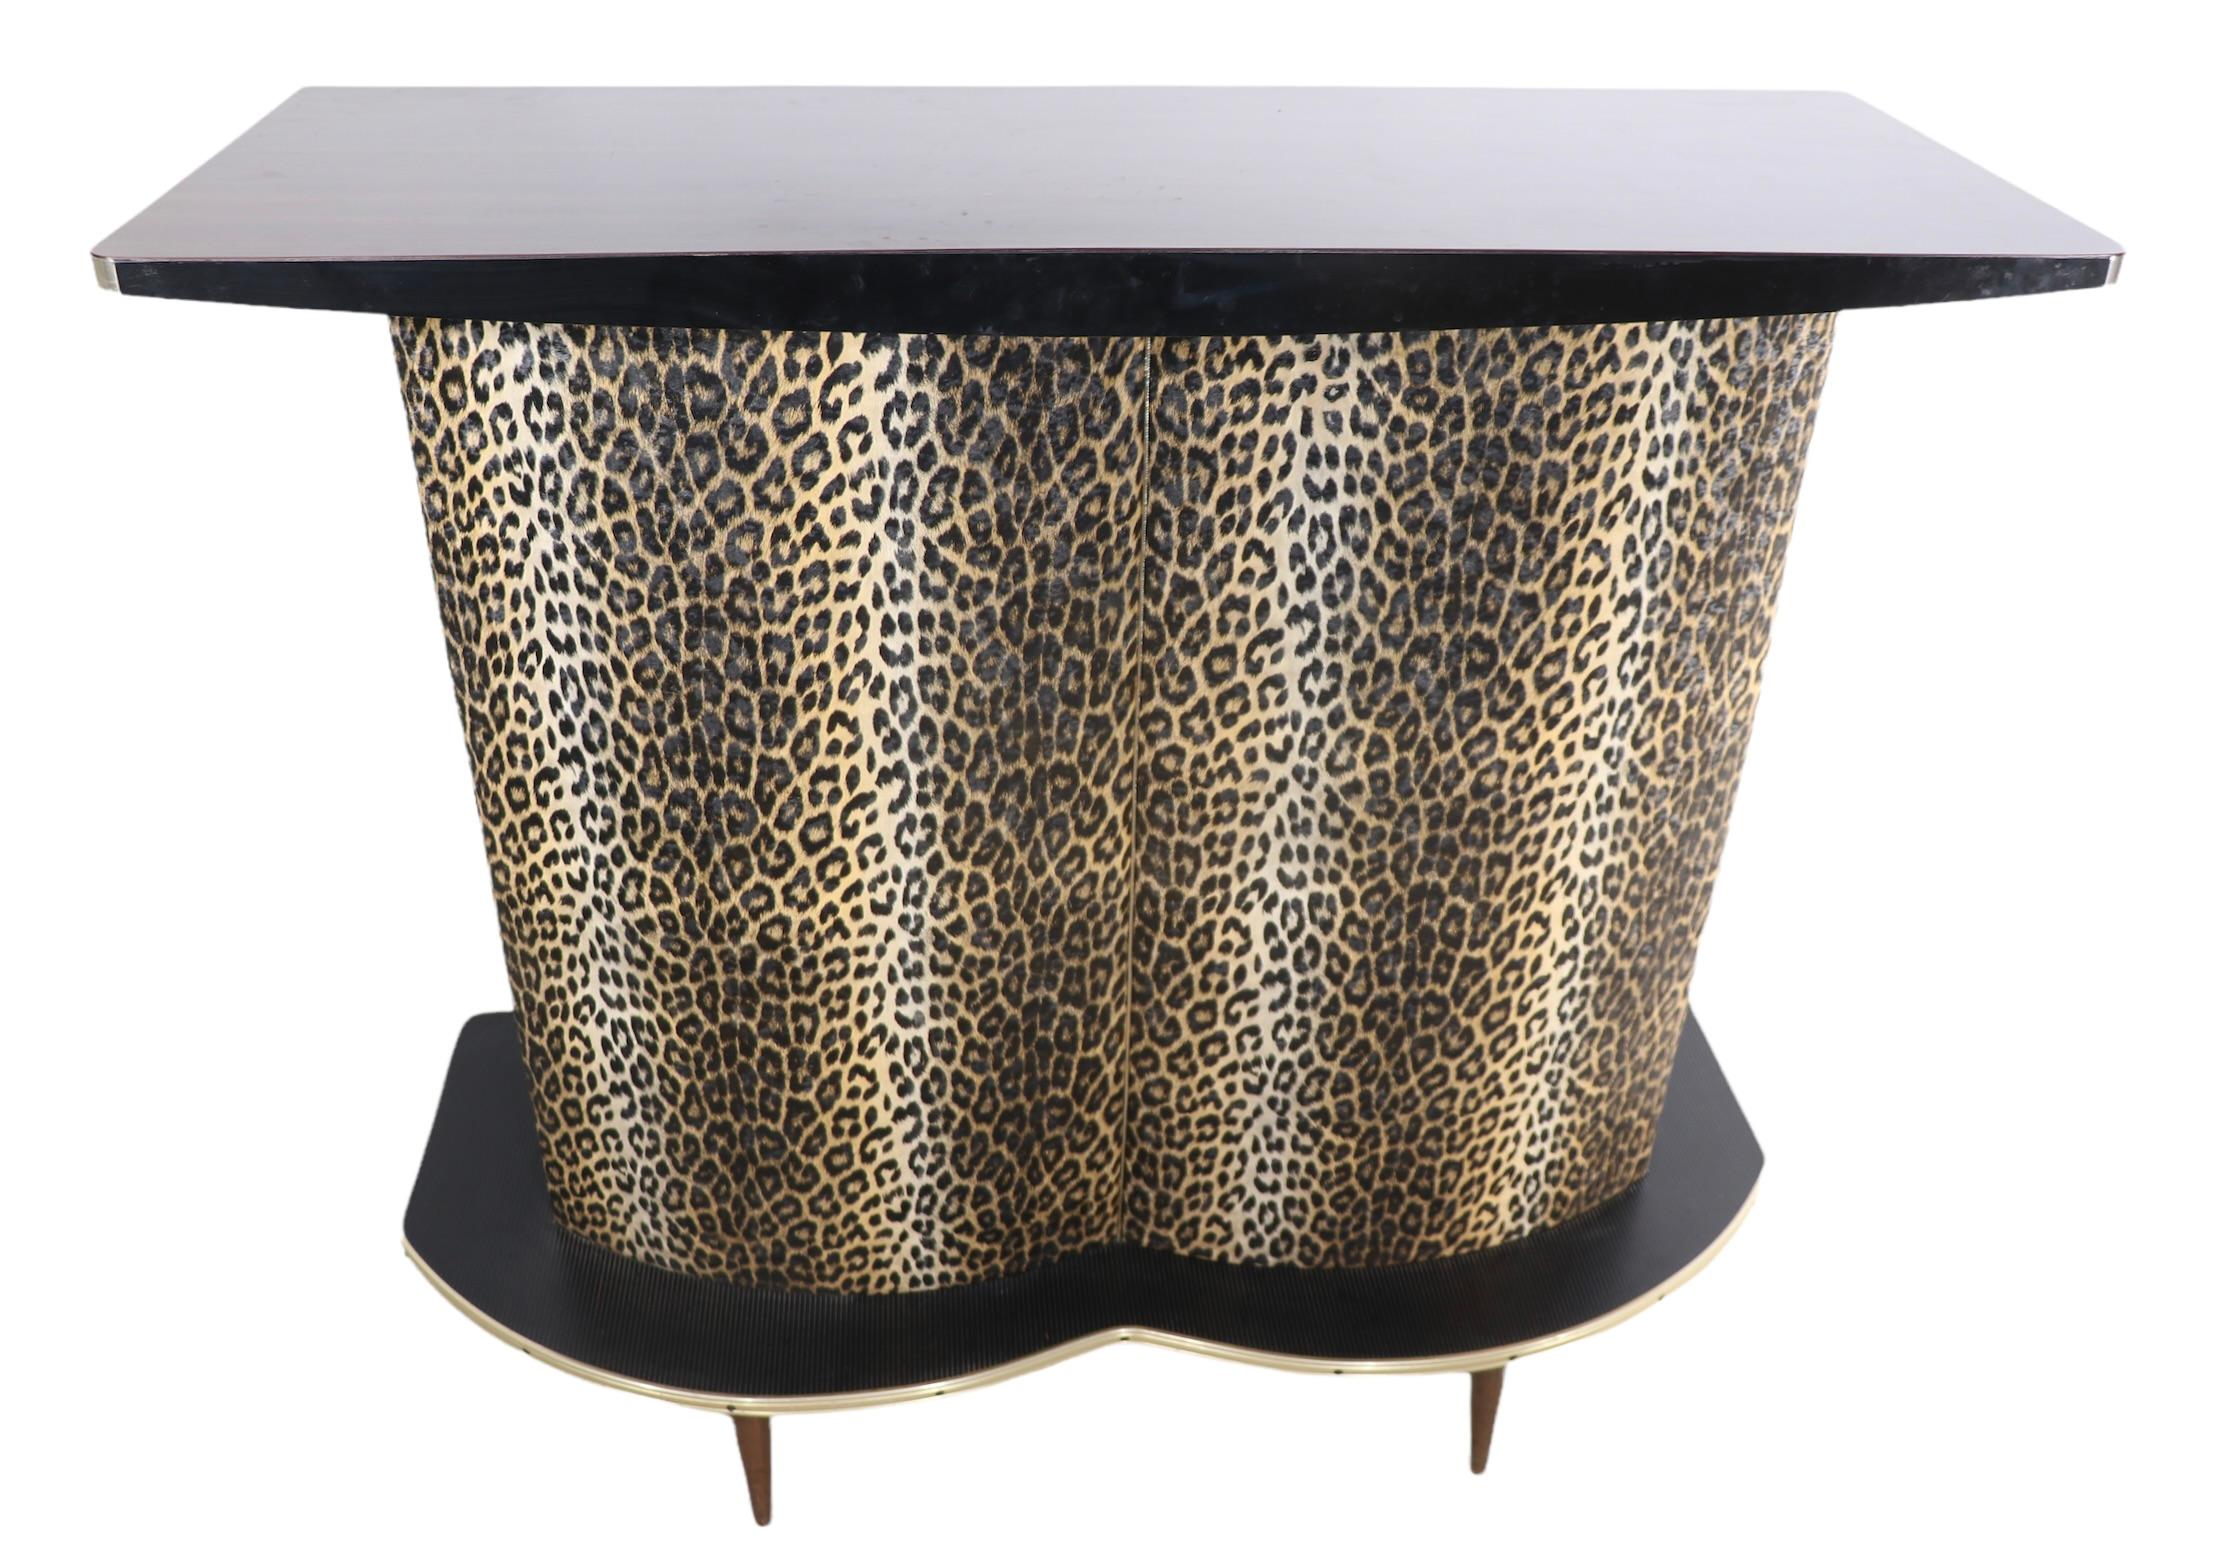 Mid-Century Modern Counter Dry Bar with Matching Stools in Cheetah Vinyl ca 1950/1960's Made in USA